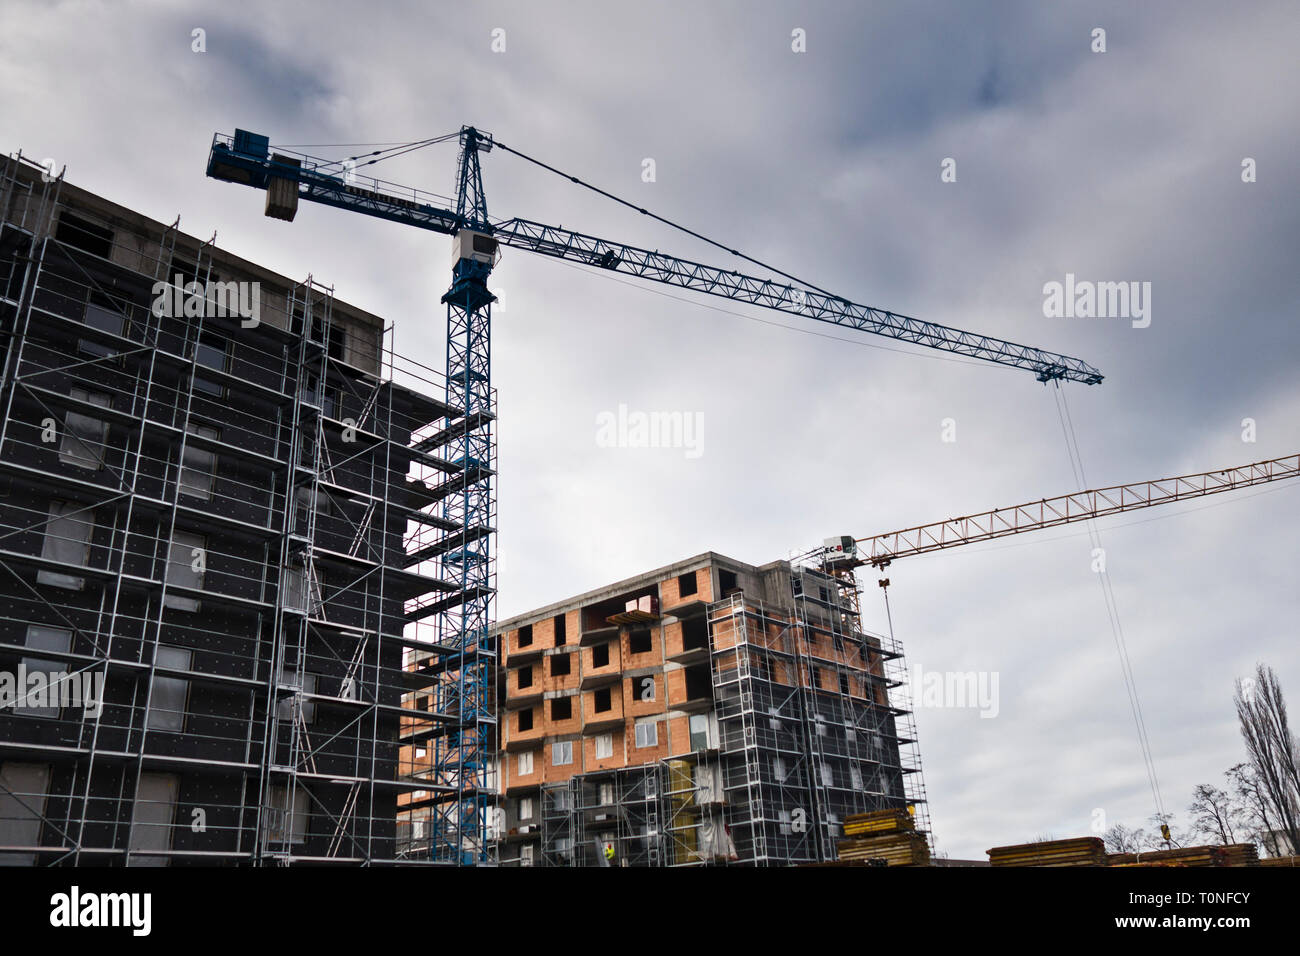 multi-story residential building in construction Stock Photo